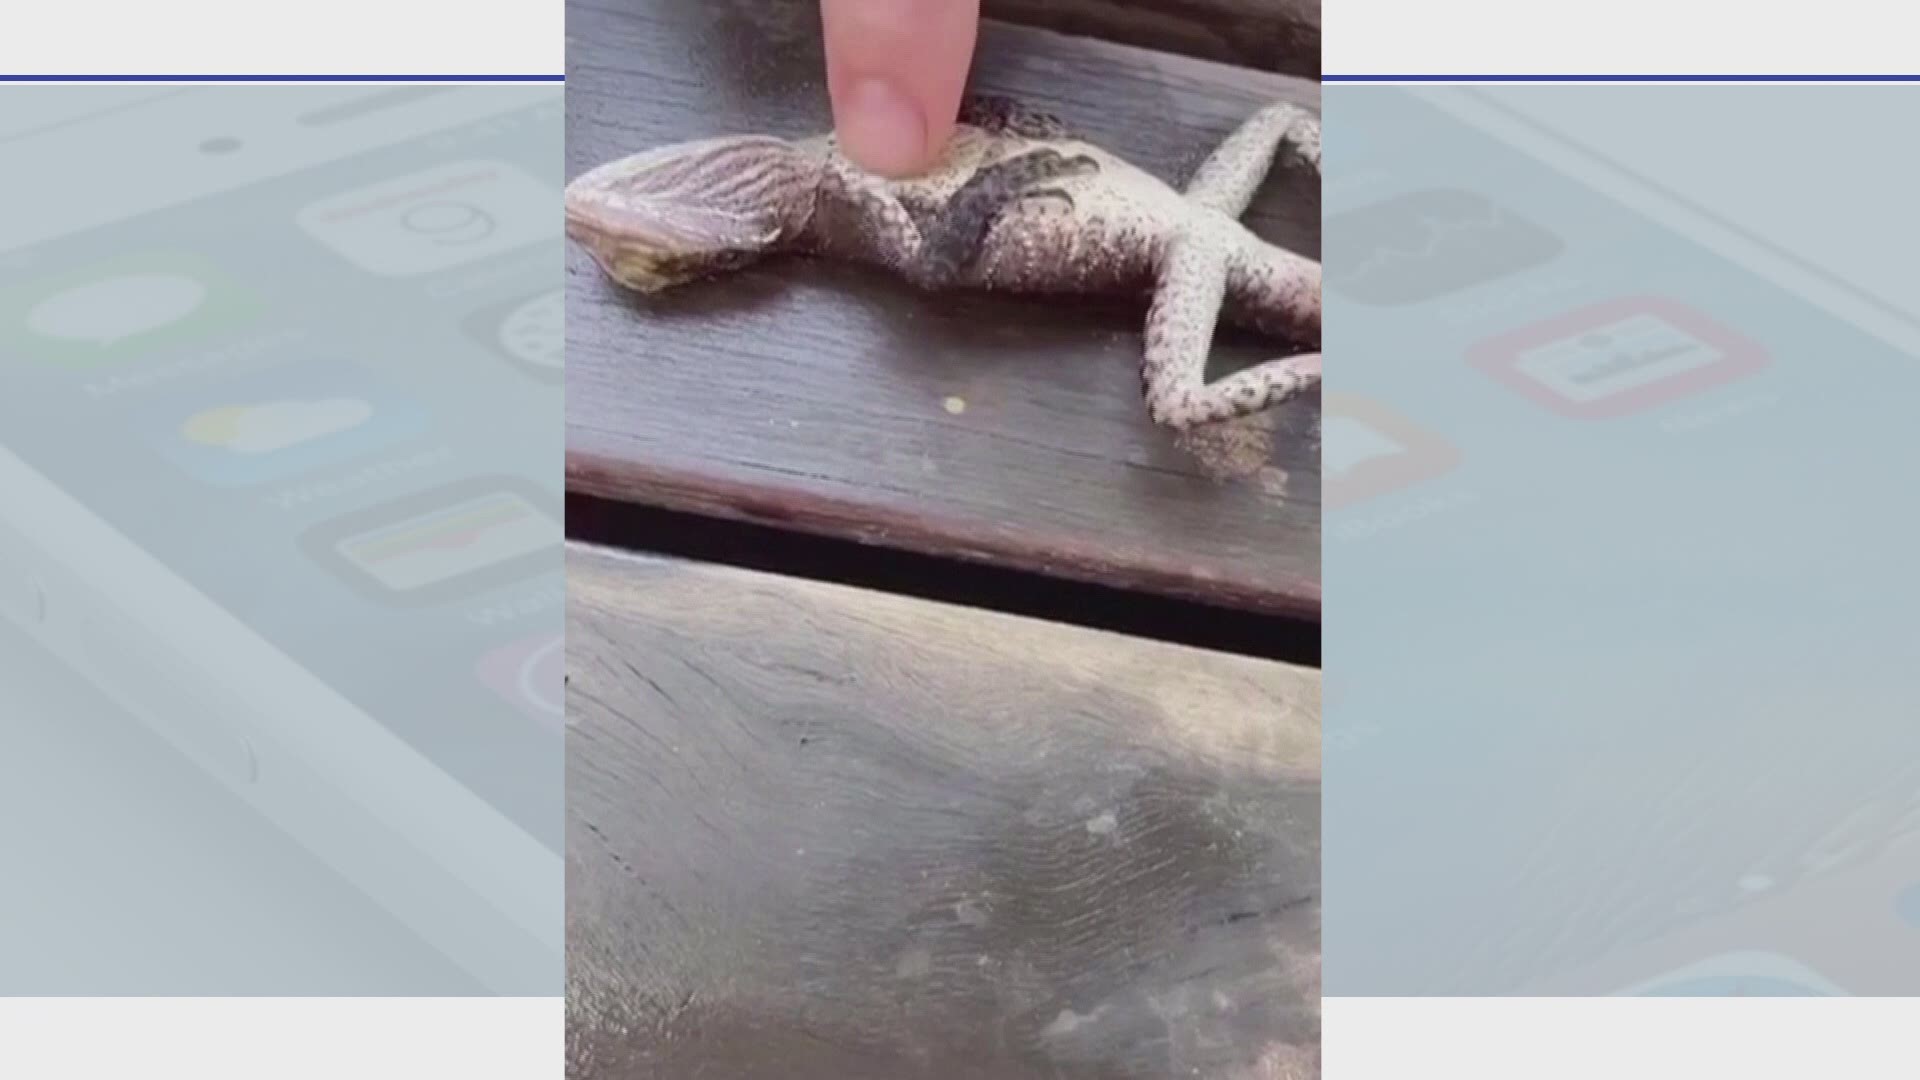 An off-duty firefighter sprung into action to save a drowning lizard.